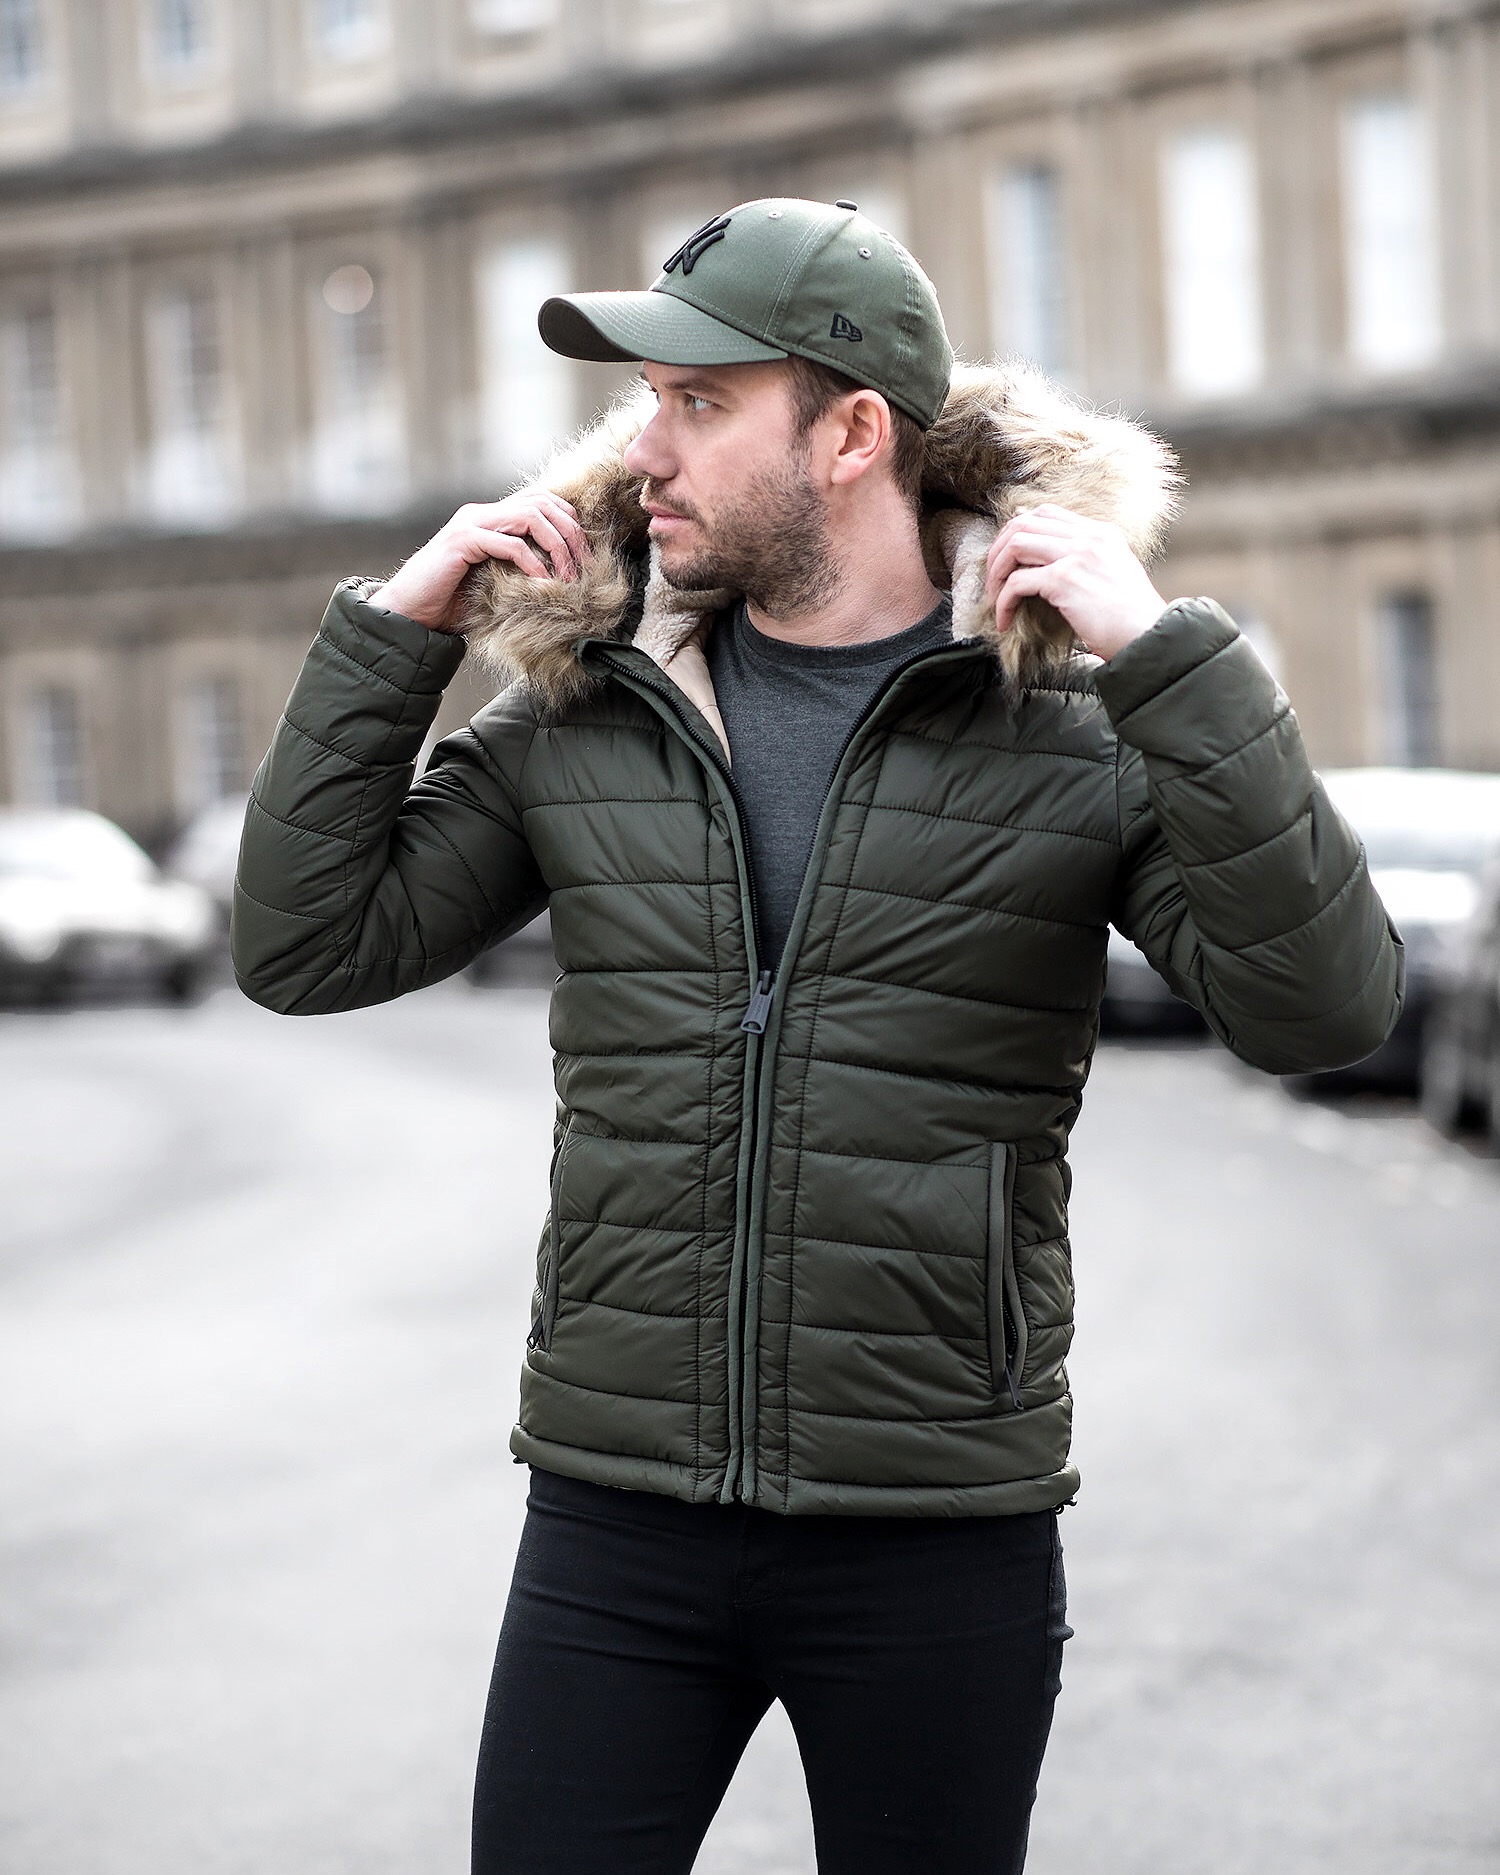 Faial suggest Challenge 6 Must Have Men's Coat Styles For Winter | Your Average Guy